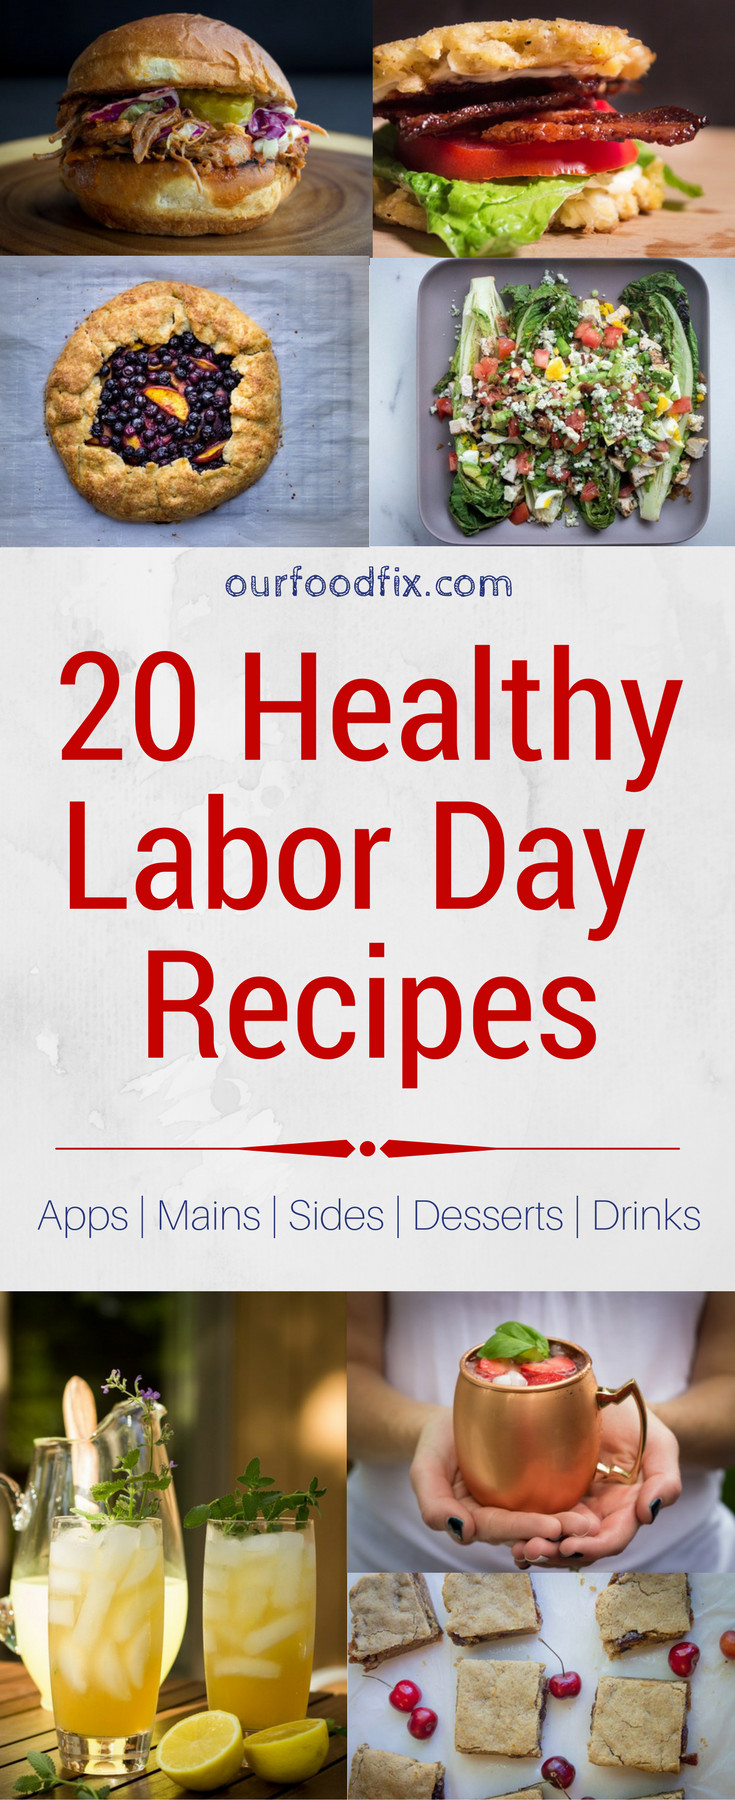 Labor Day Cookout Menu Ideas
 Recipe Roundup 20 Healthy Labor Day Cookout Favorites